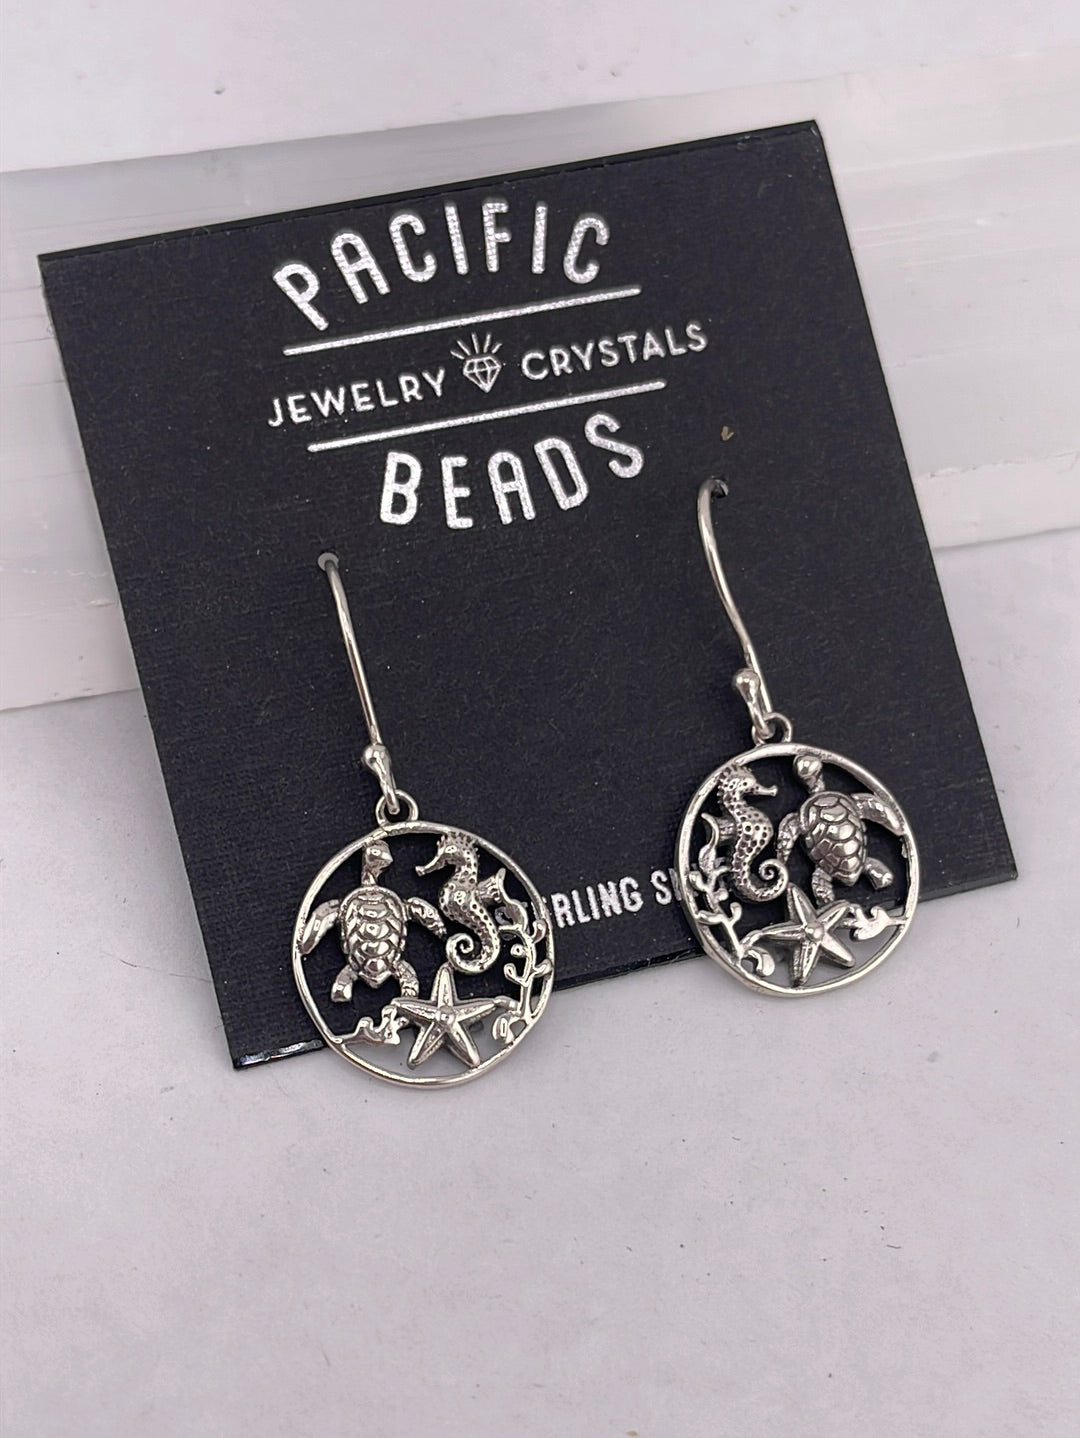 Sterling silver sea creature earrings available at wholesale and retail prices, only at our crystal shop in San Diego!